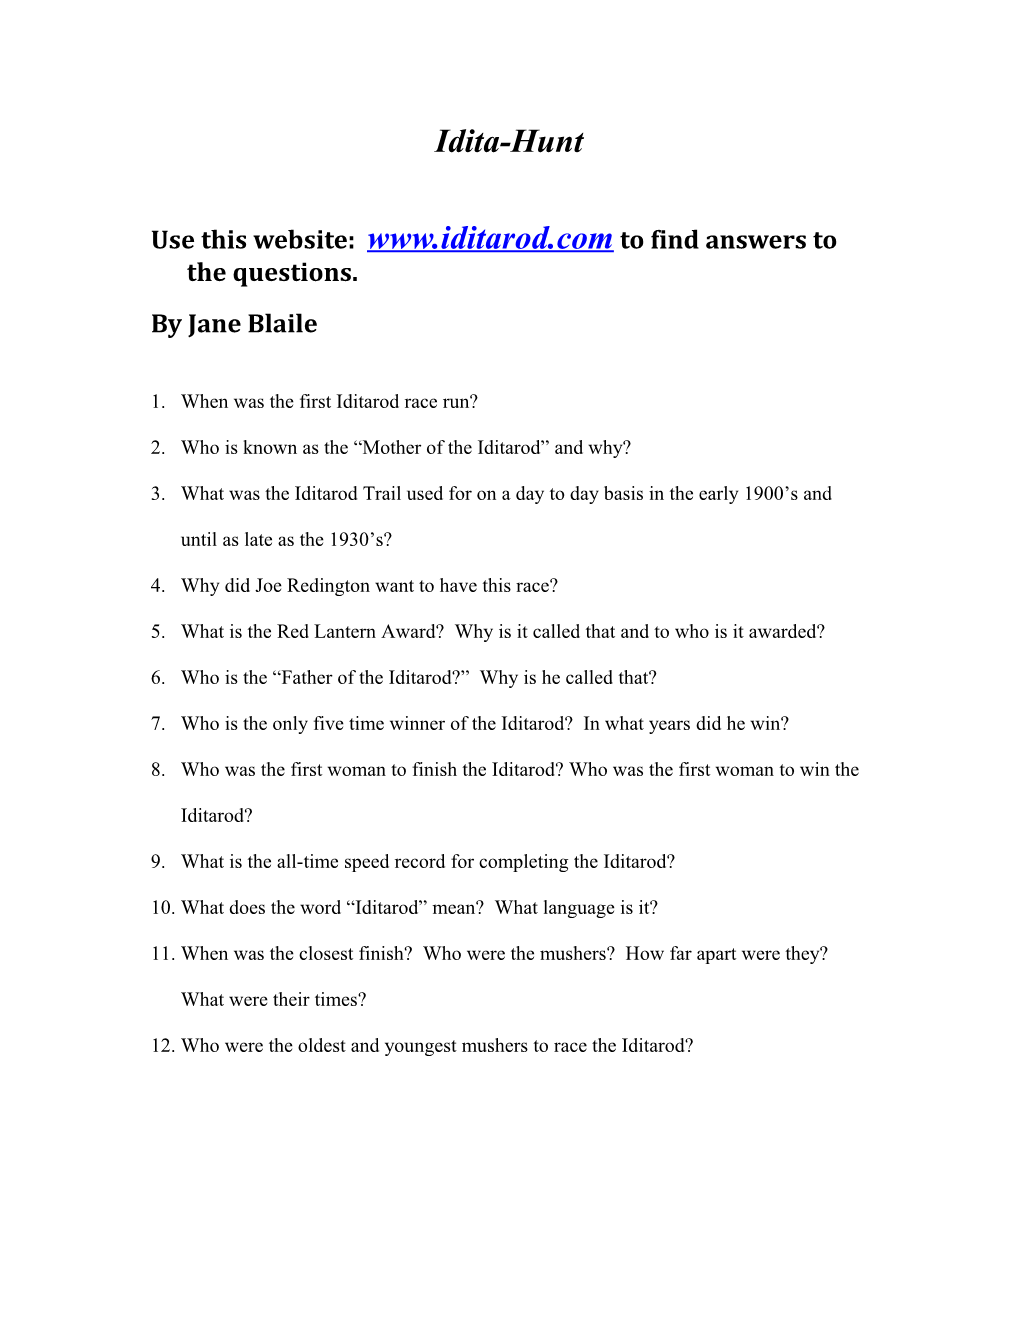 Use This Website: to Find Answers to the Questions